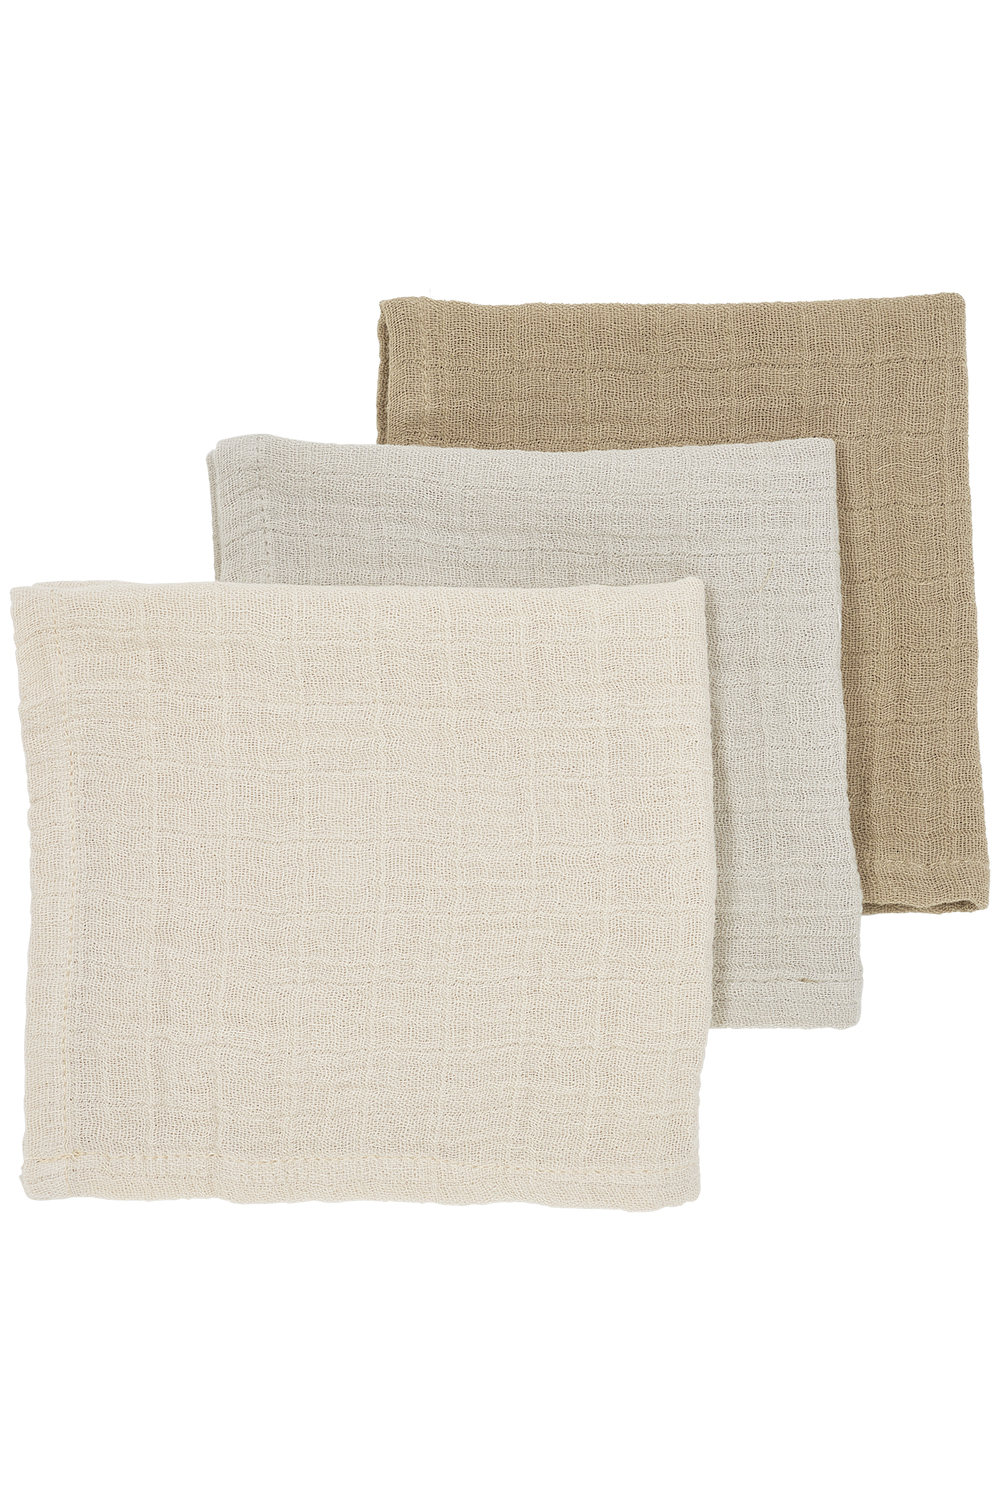 Spucktücher 3er pack pre-washed musselin Uni - soft sand/greige/taupe - 30x30cm